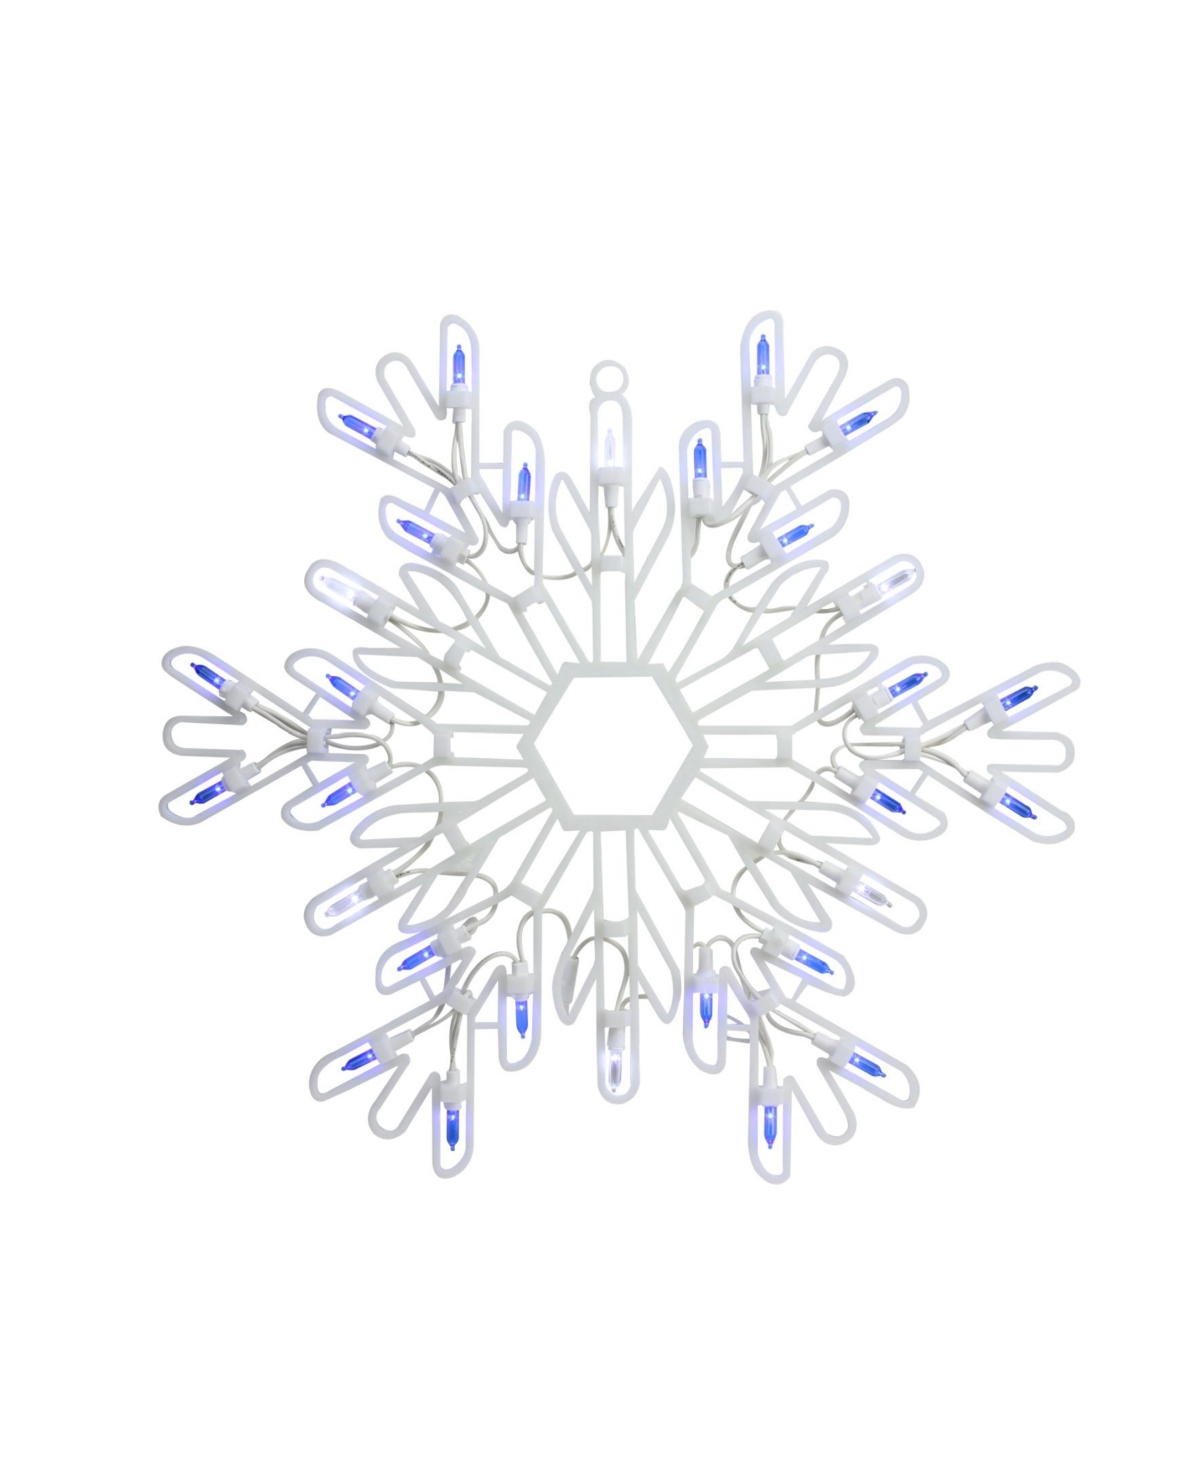 15" Led Lighted Pure White and Blue Snowflake Christmas Window Silhouette Decoration - White